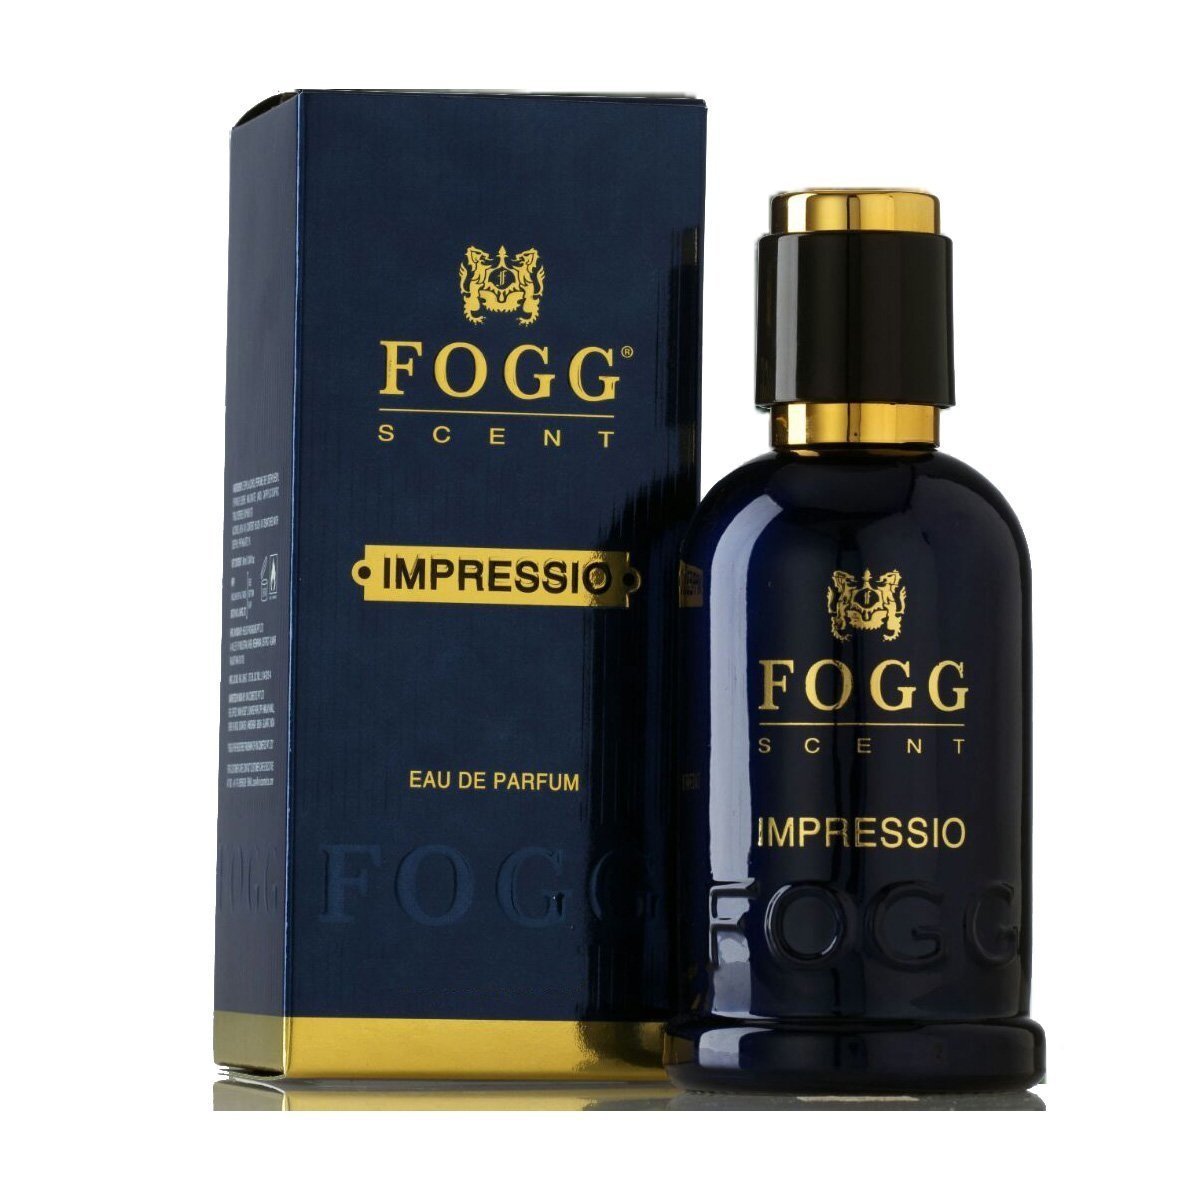 Fogg Impressio Scent For Men - perfumes for men in india -The Dashing Man